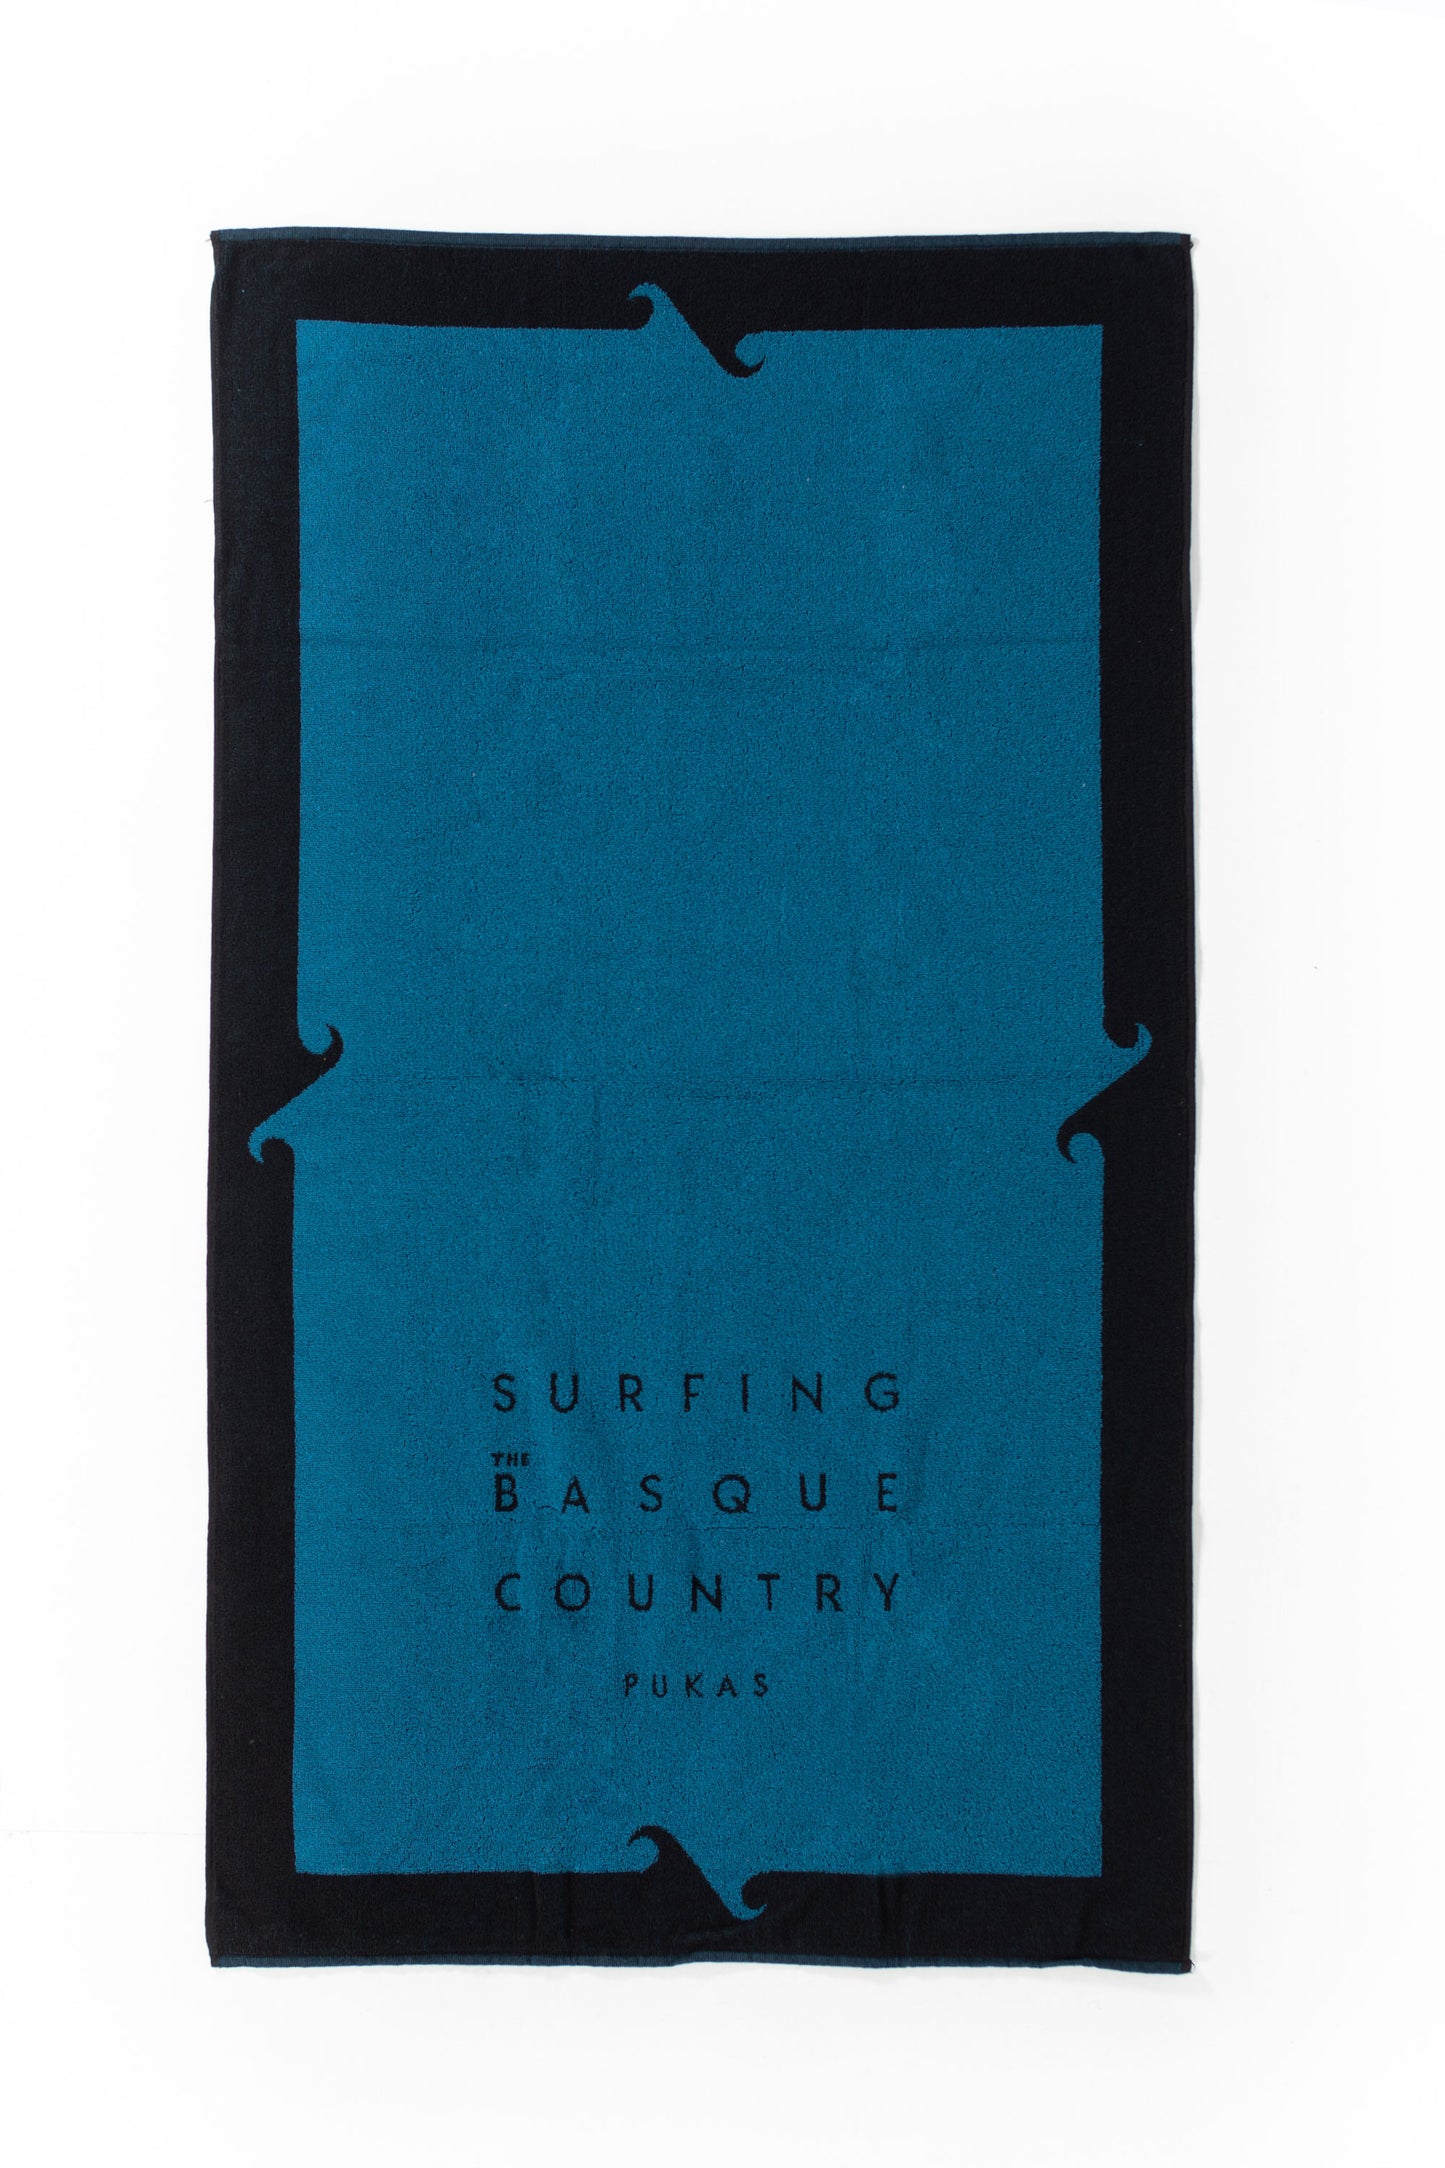 Pukas-Surf-Shop-Surfing-the-basque-country-towel-black-navy